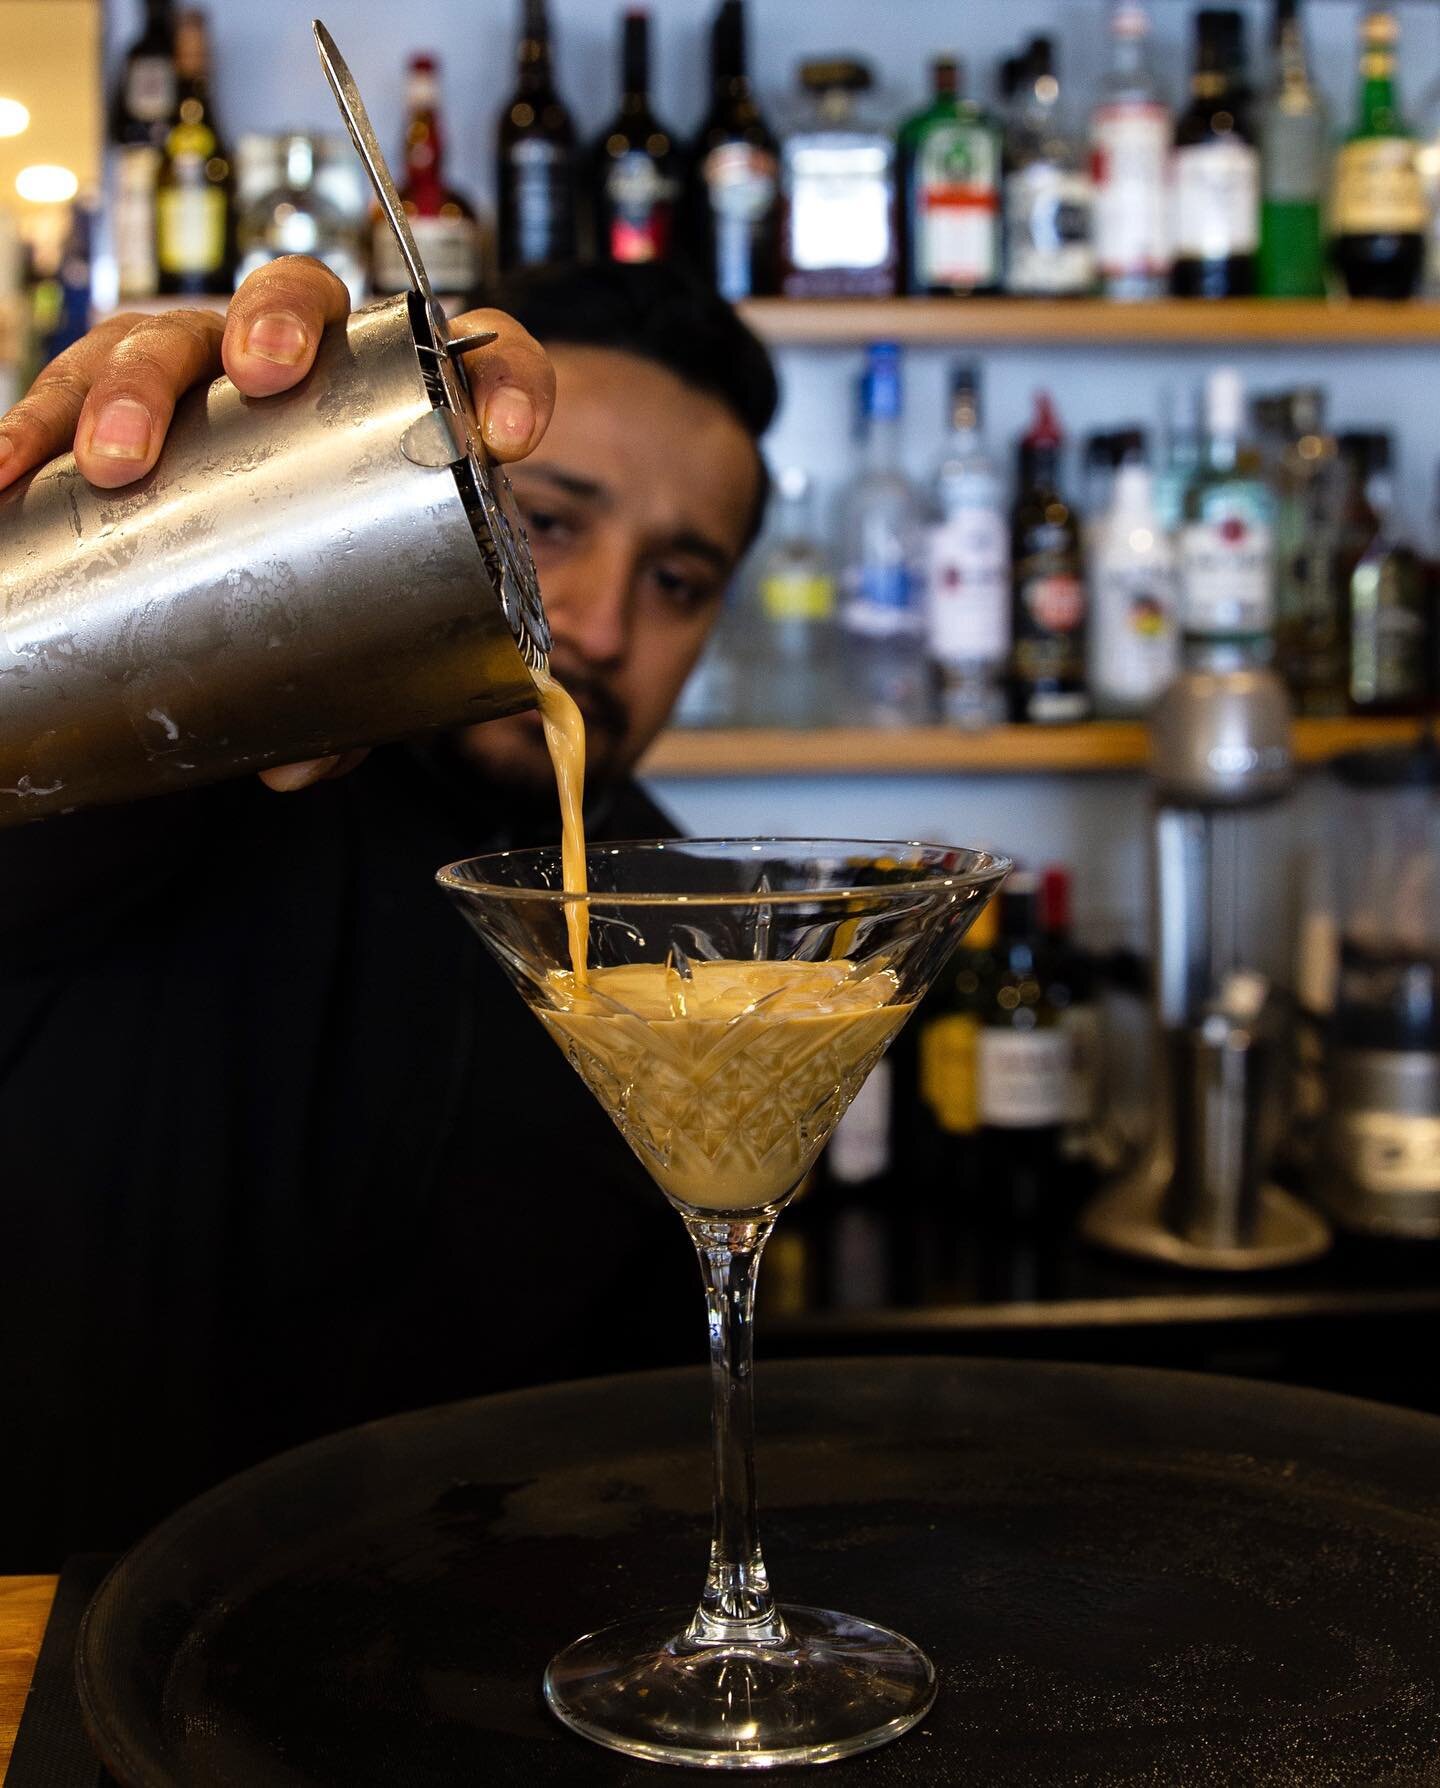 is 11:30am too early for espresso martini&rsquo;s? It&rsquo;s essentially just having a second &lsquo;morning coffee&rsquo;...